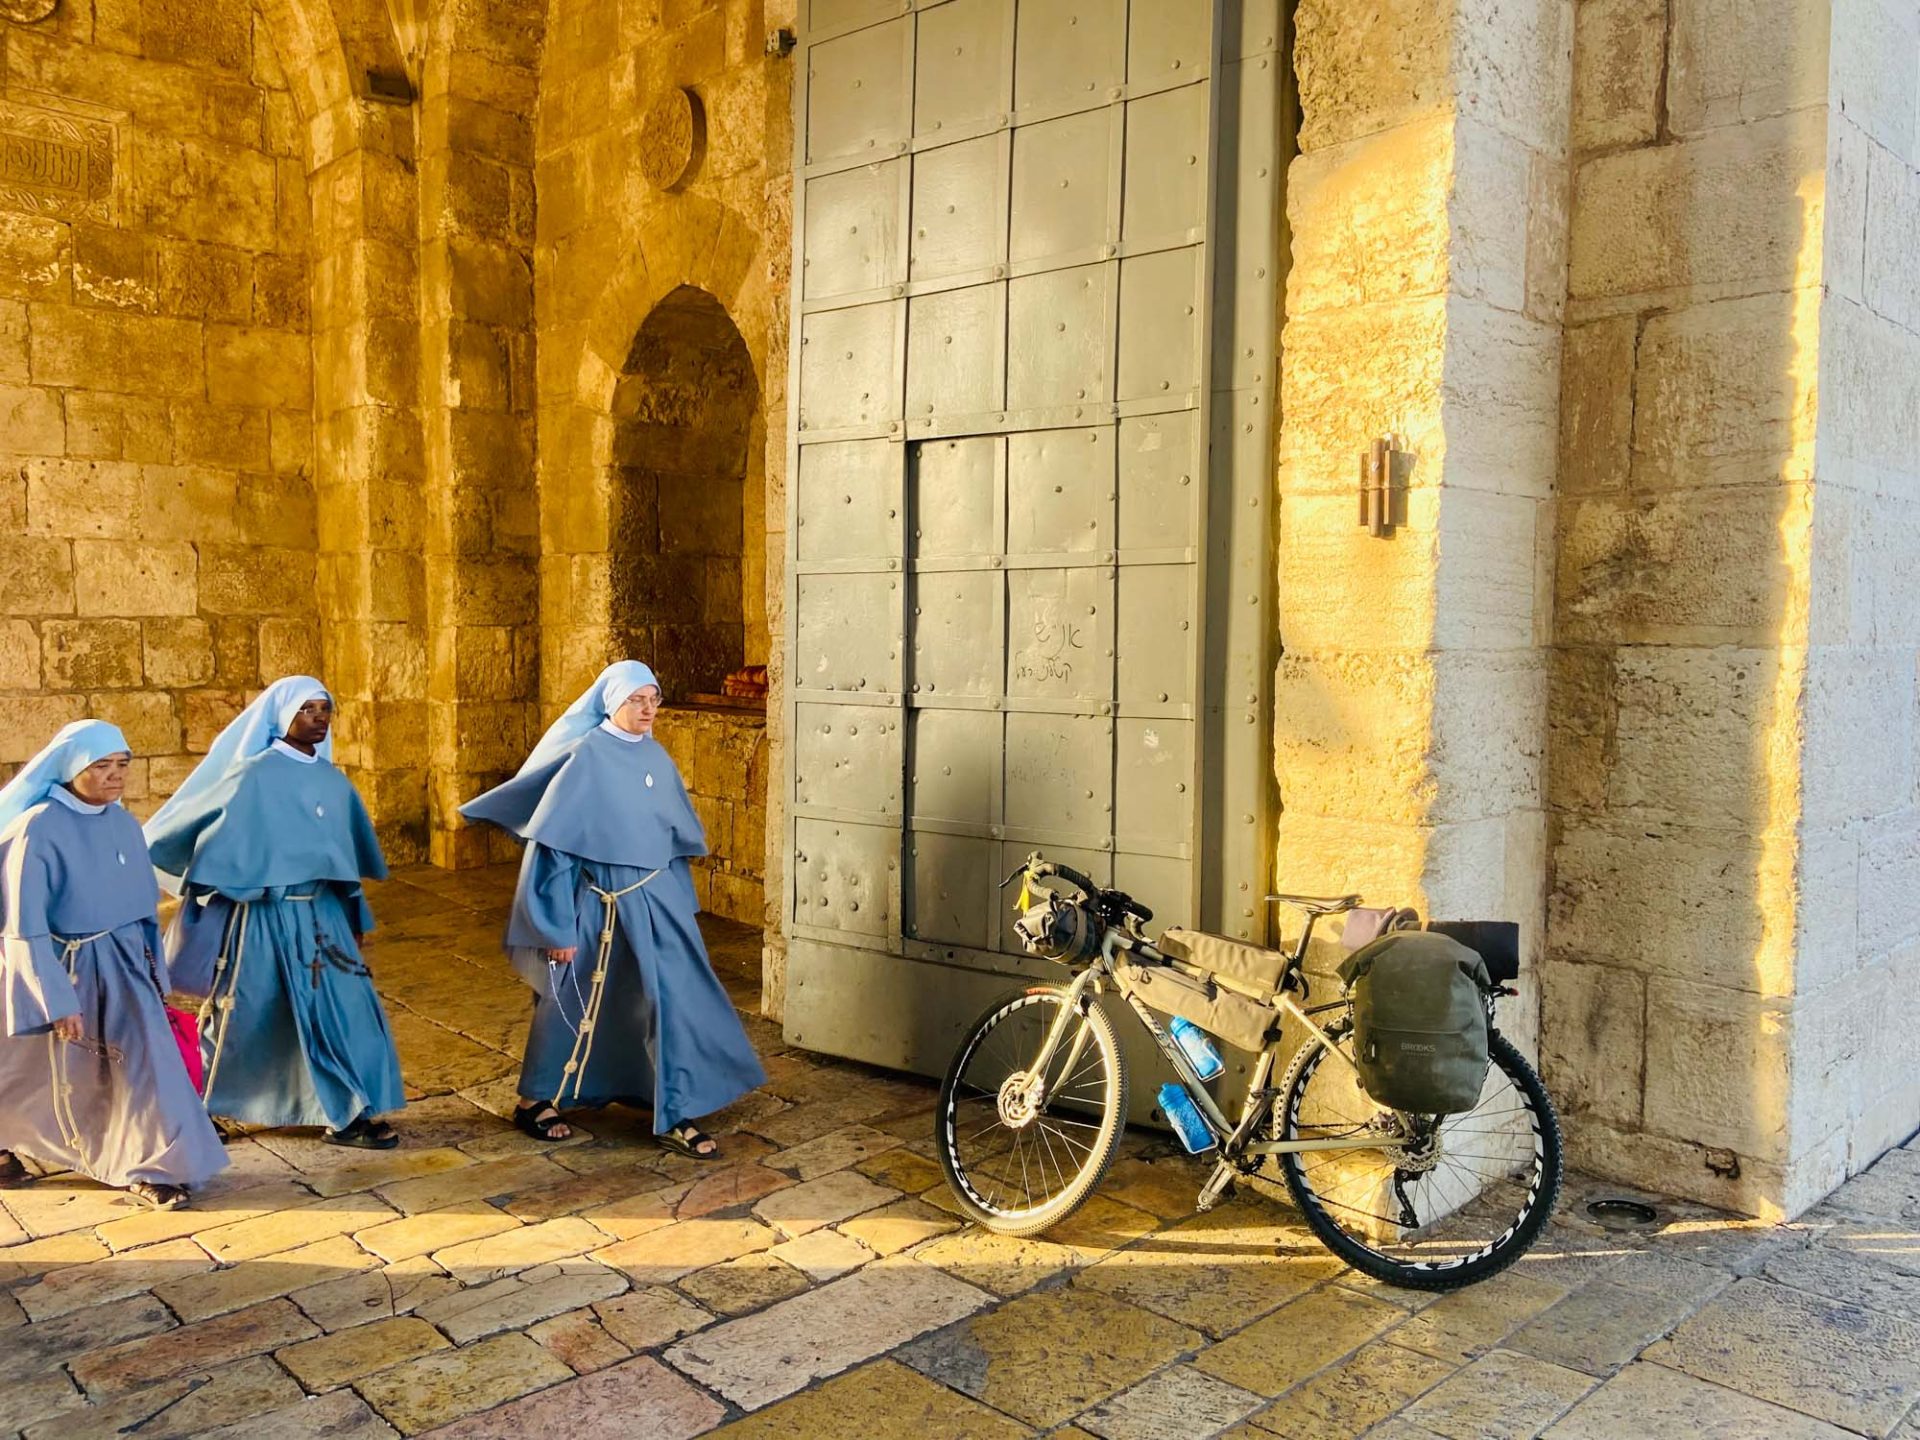 Lazzarin's bike leans against an ancient stone wall, with the sun shining golden rays across the scene. Three nuns in habits walk past. 